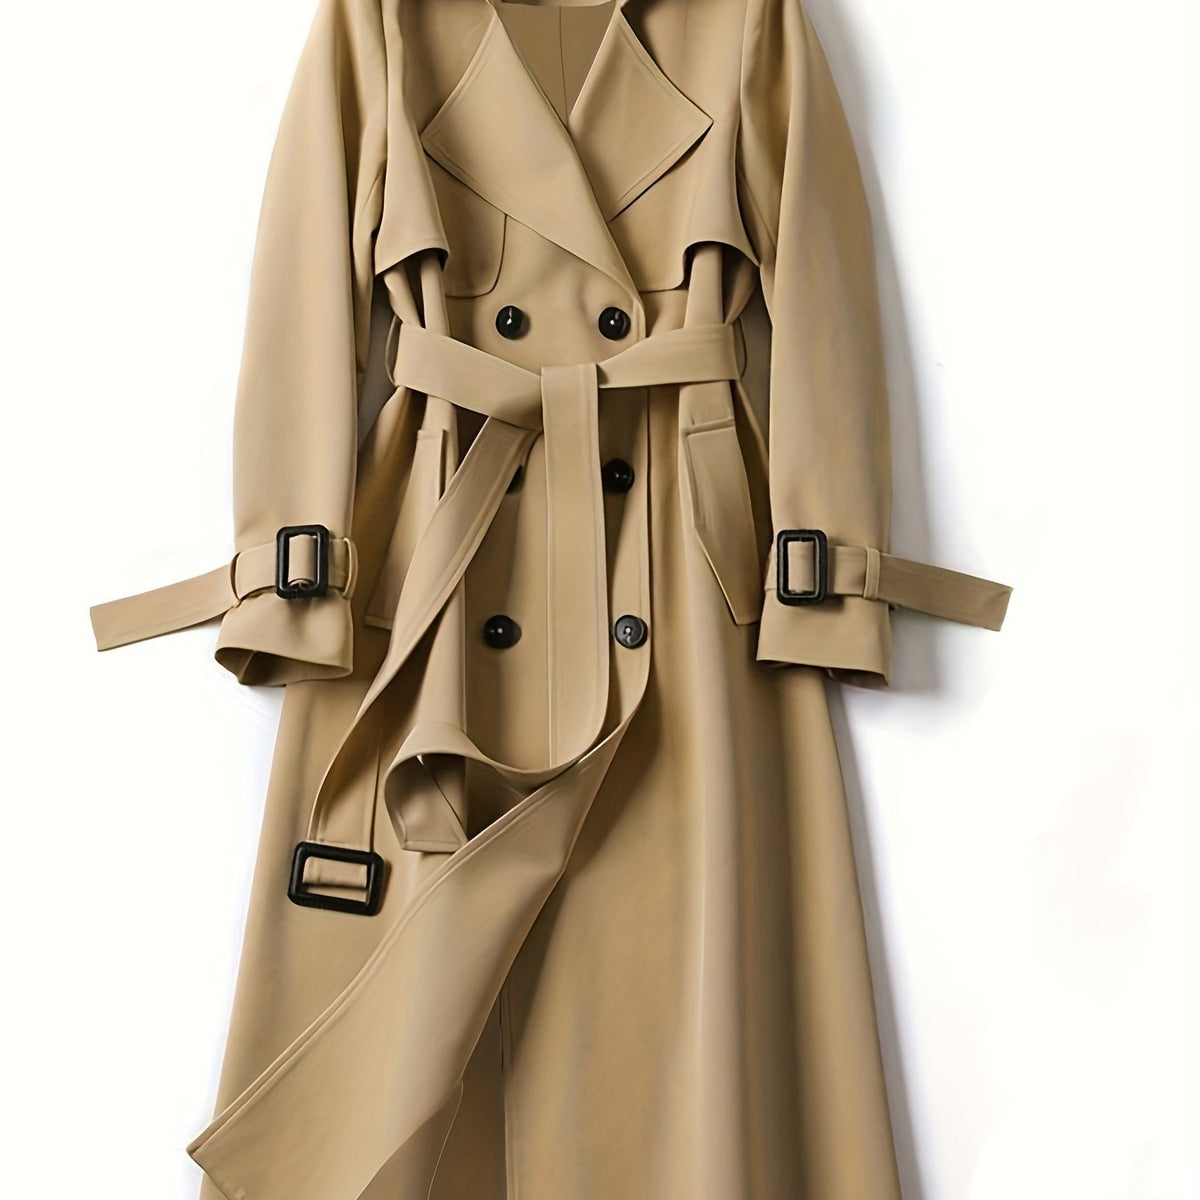 vlovelaw  Double Breasted Trench Coat, Casual Lapel Long Sleeve Outerwear, Women's Clothing